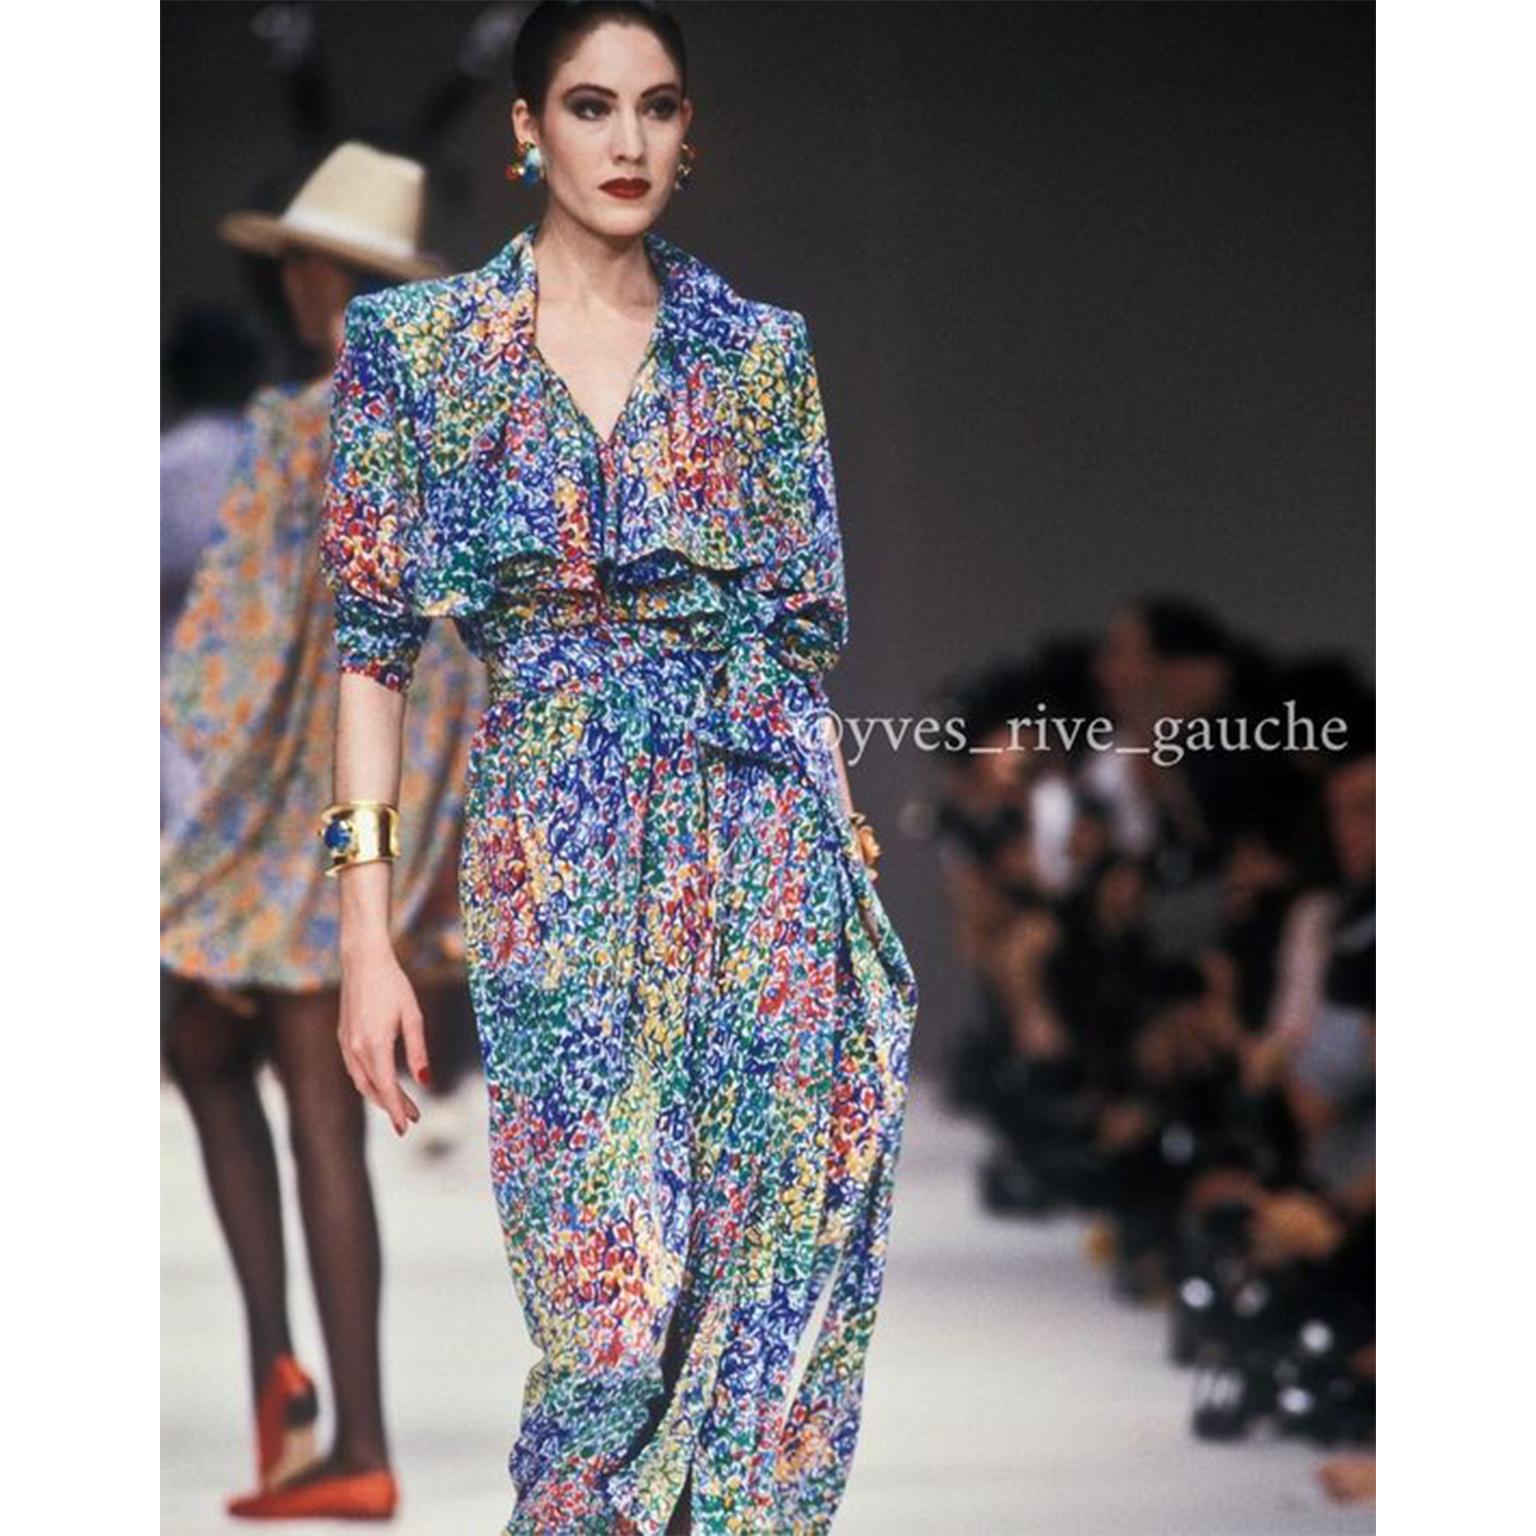 We love vintage Yves Saint Laurent and we especially love his iconic silk dresses. Beautiful, unique prints were a signature element of Saint Laurent's vintage designs. This 100% silk wrap dress was featured on the Spring Summer 1989 YSL runway.